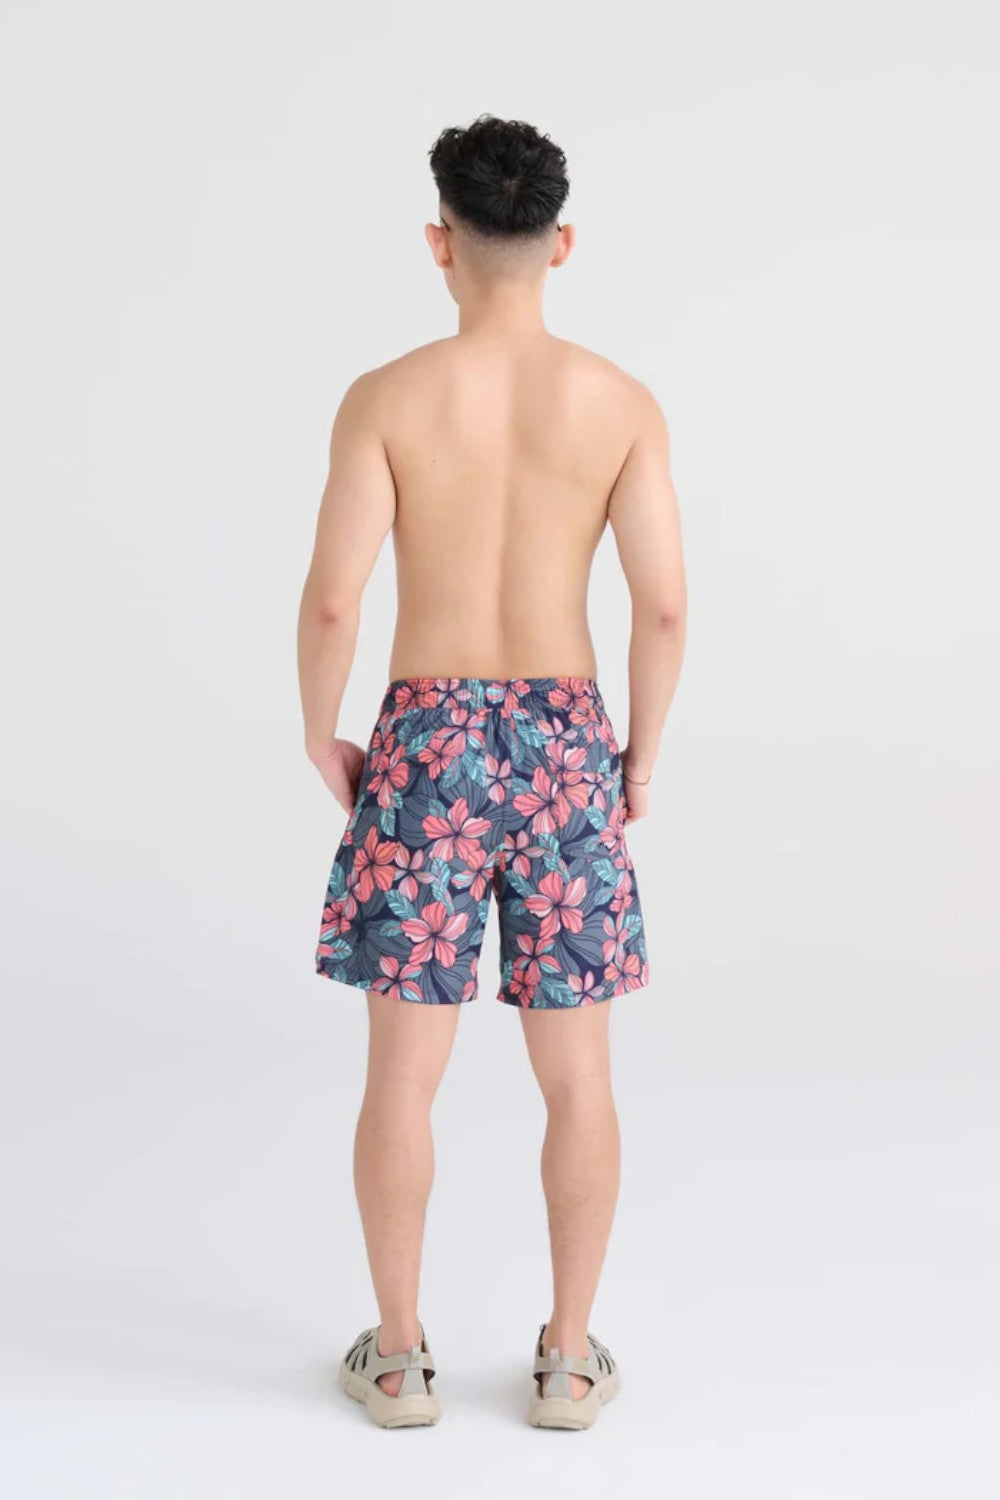 These 2N1 swim shorts combine a Slim Fit liner over a fixed-waist shell. The integrated liner is form-fitting through the butt and thighs. Beach bash and beyond. Featuring an ultra-light mesh liner and the BallPark Pouch, Oh Buoy is primed for your next pool party. 